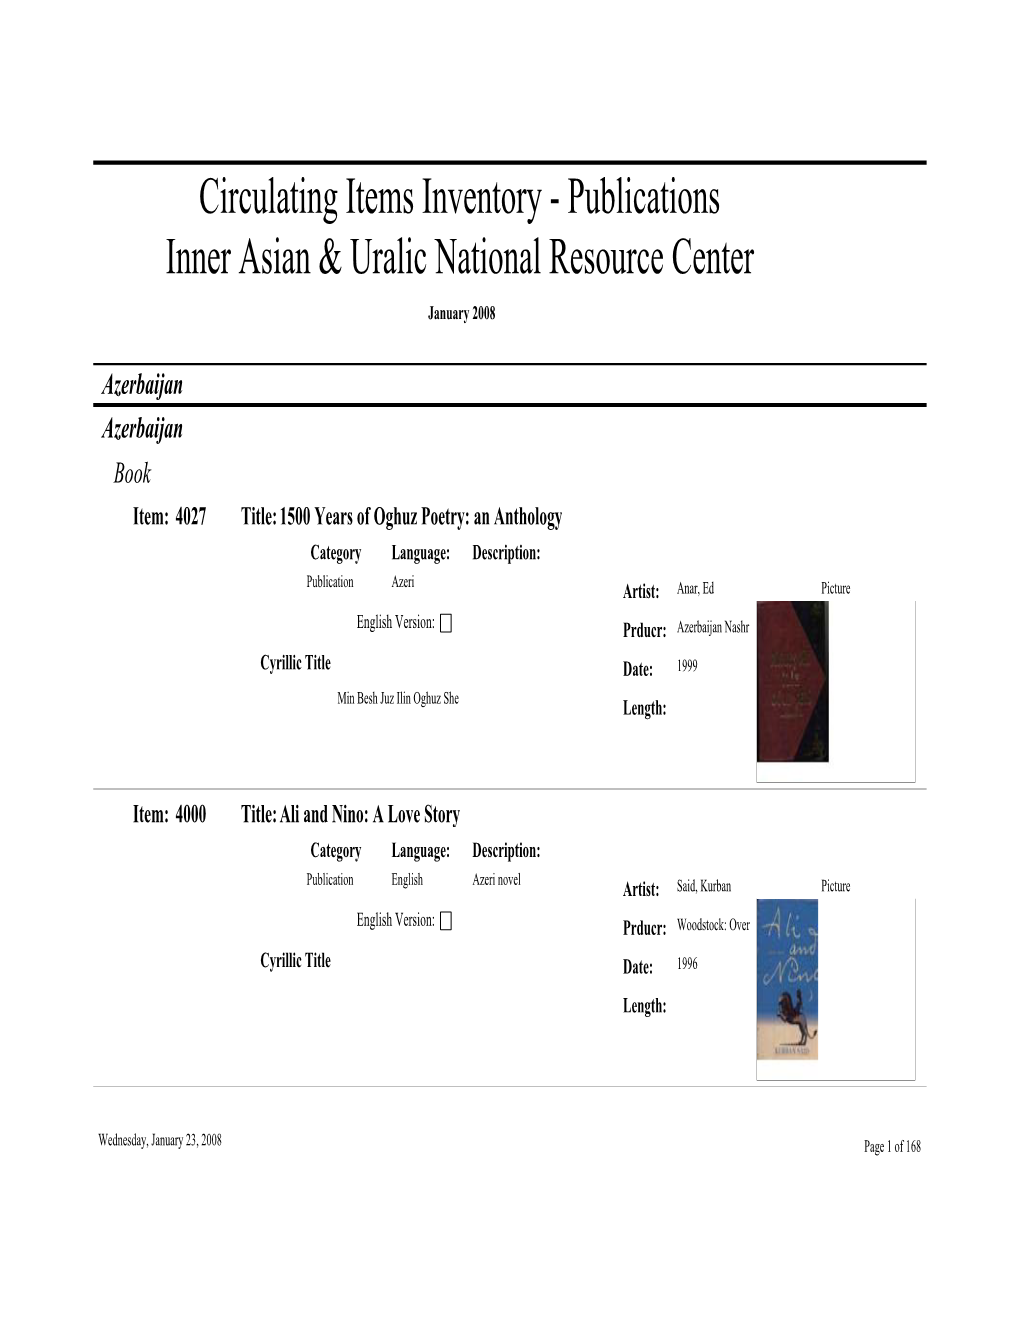 Circulating Items Inventory - Publications Inner Asian & Uralic National Resource Center